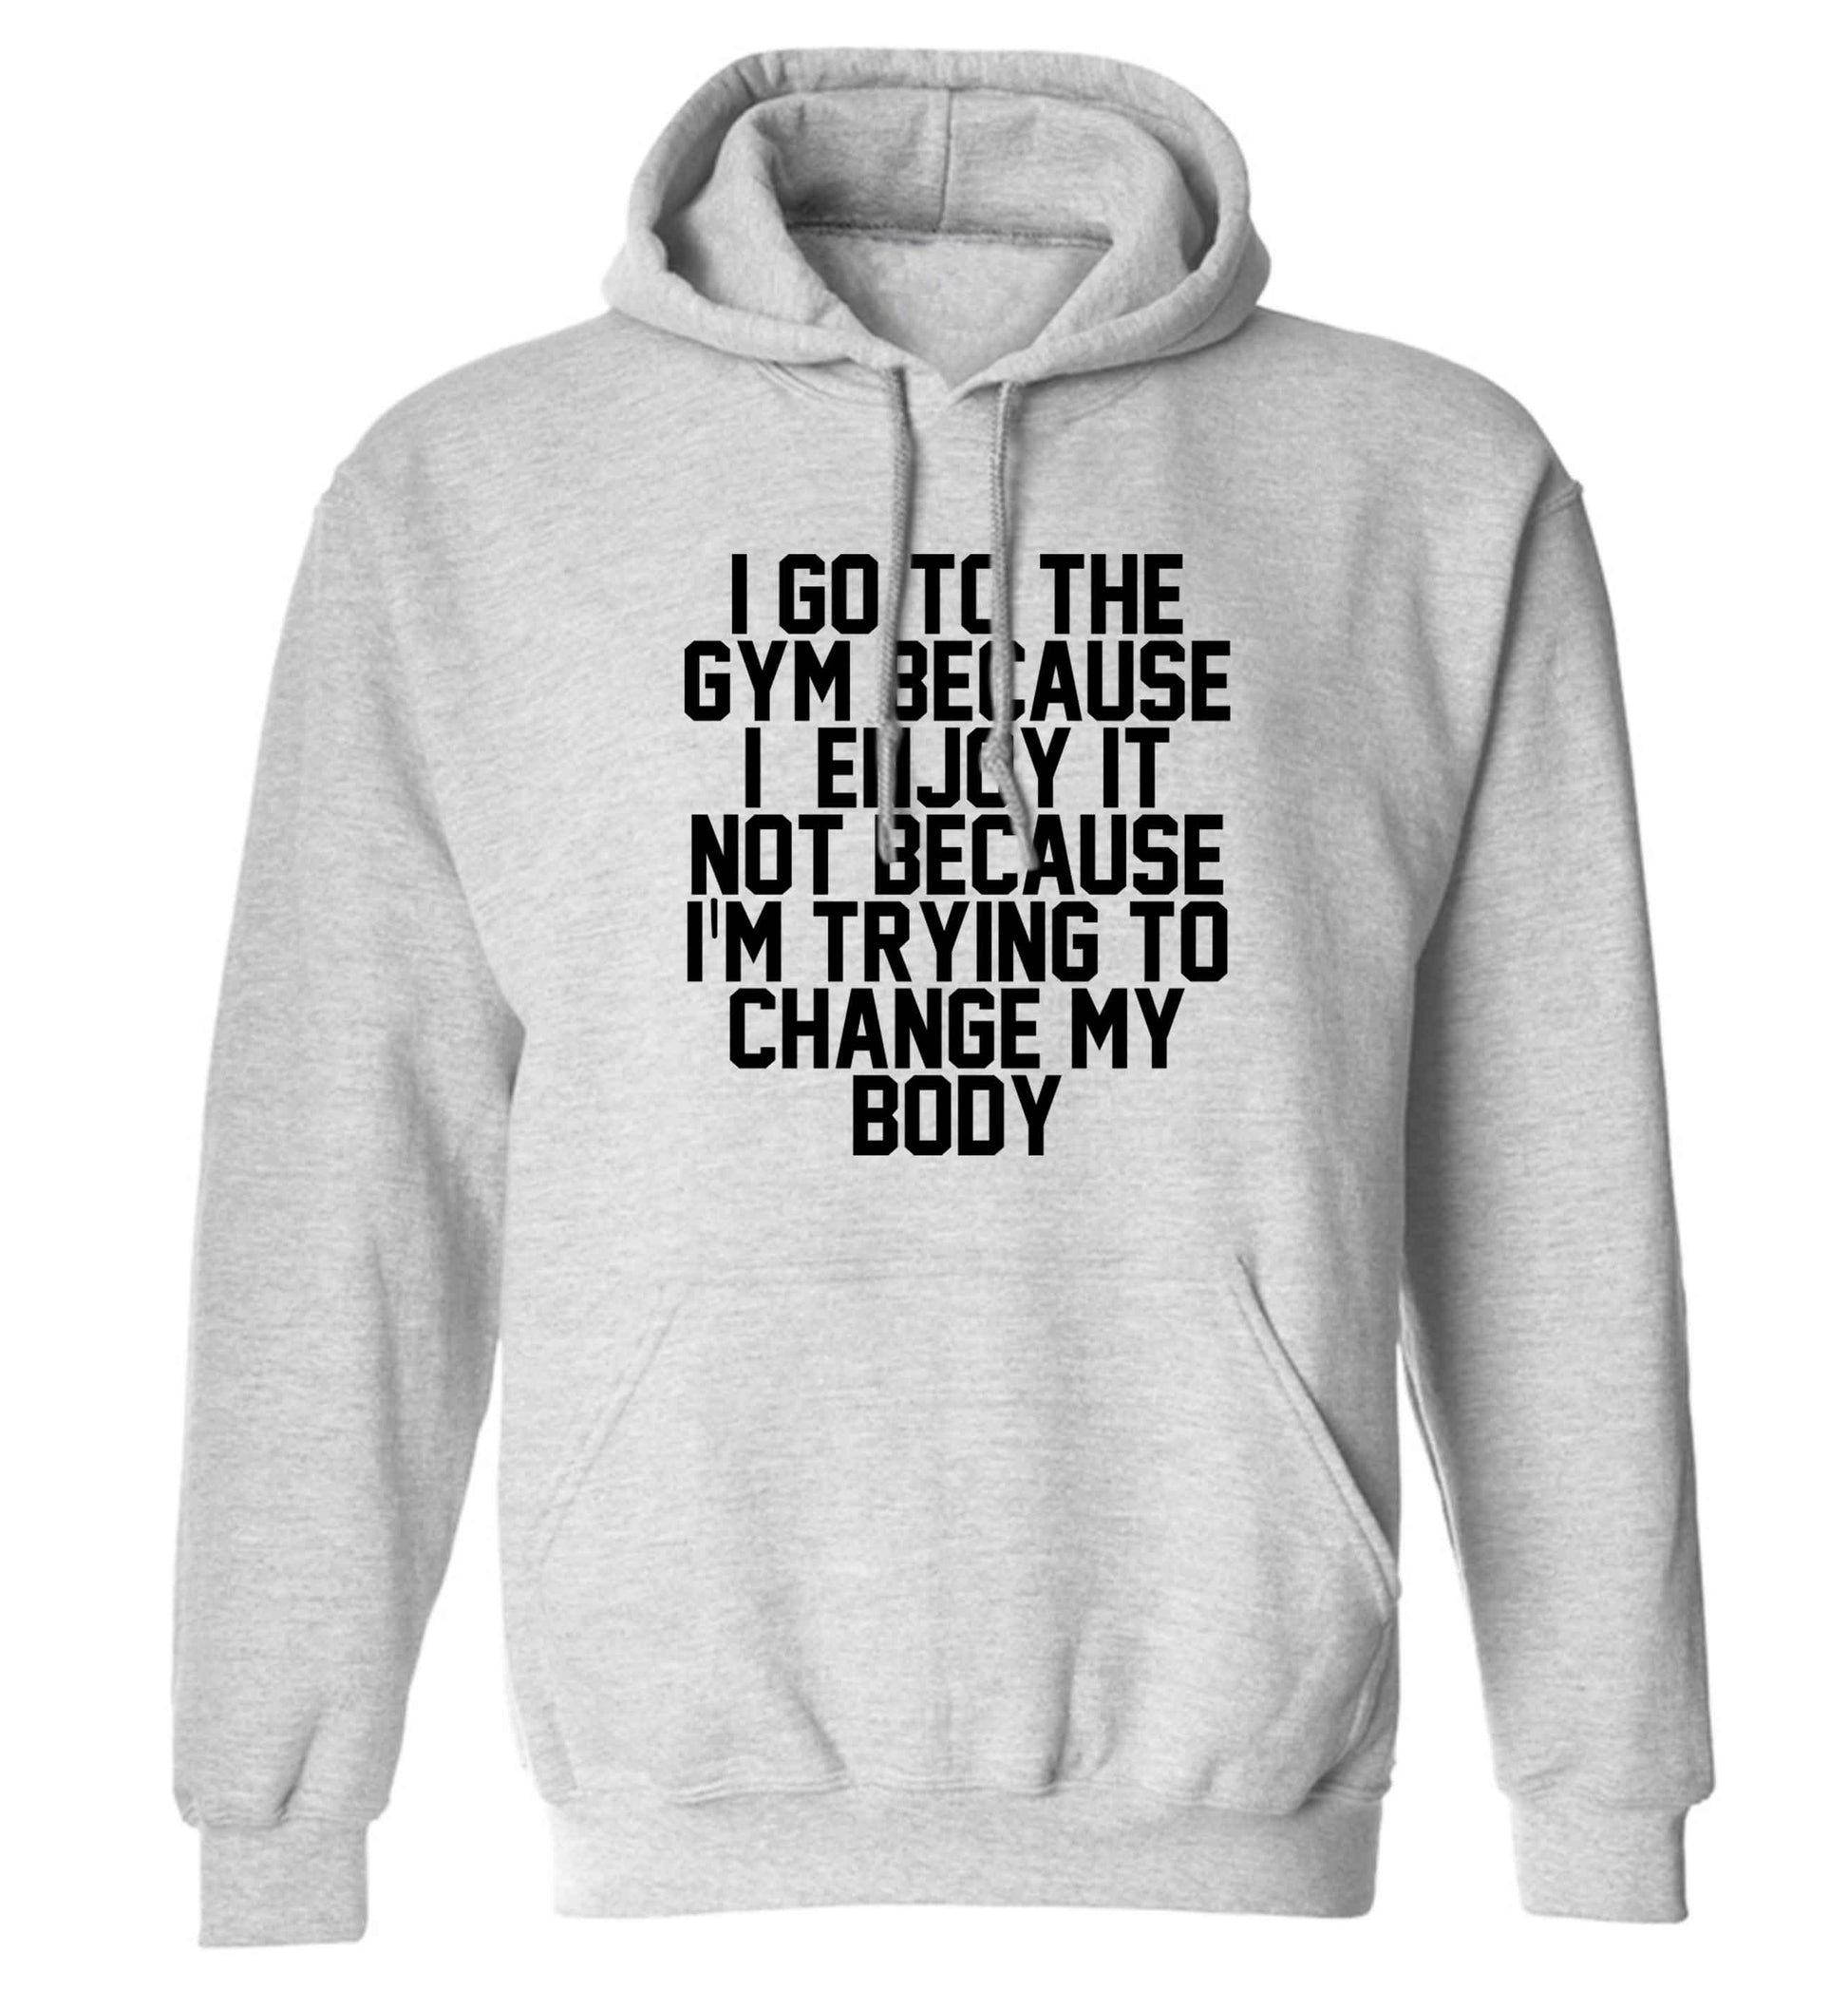 I go to the gym because I enjoy it not because I'm trying to change my body adults unisex grey hoodie 2XL